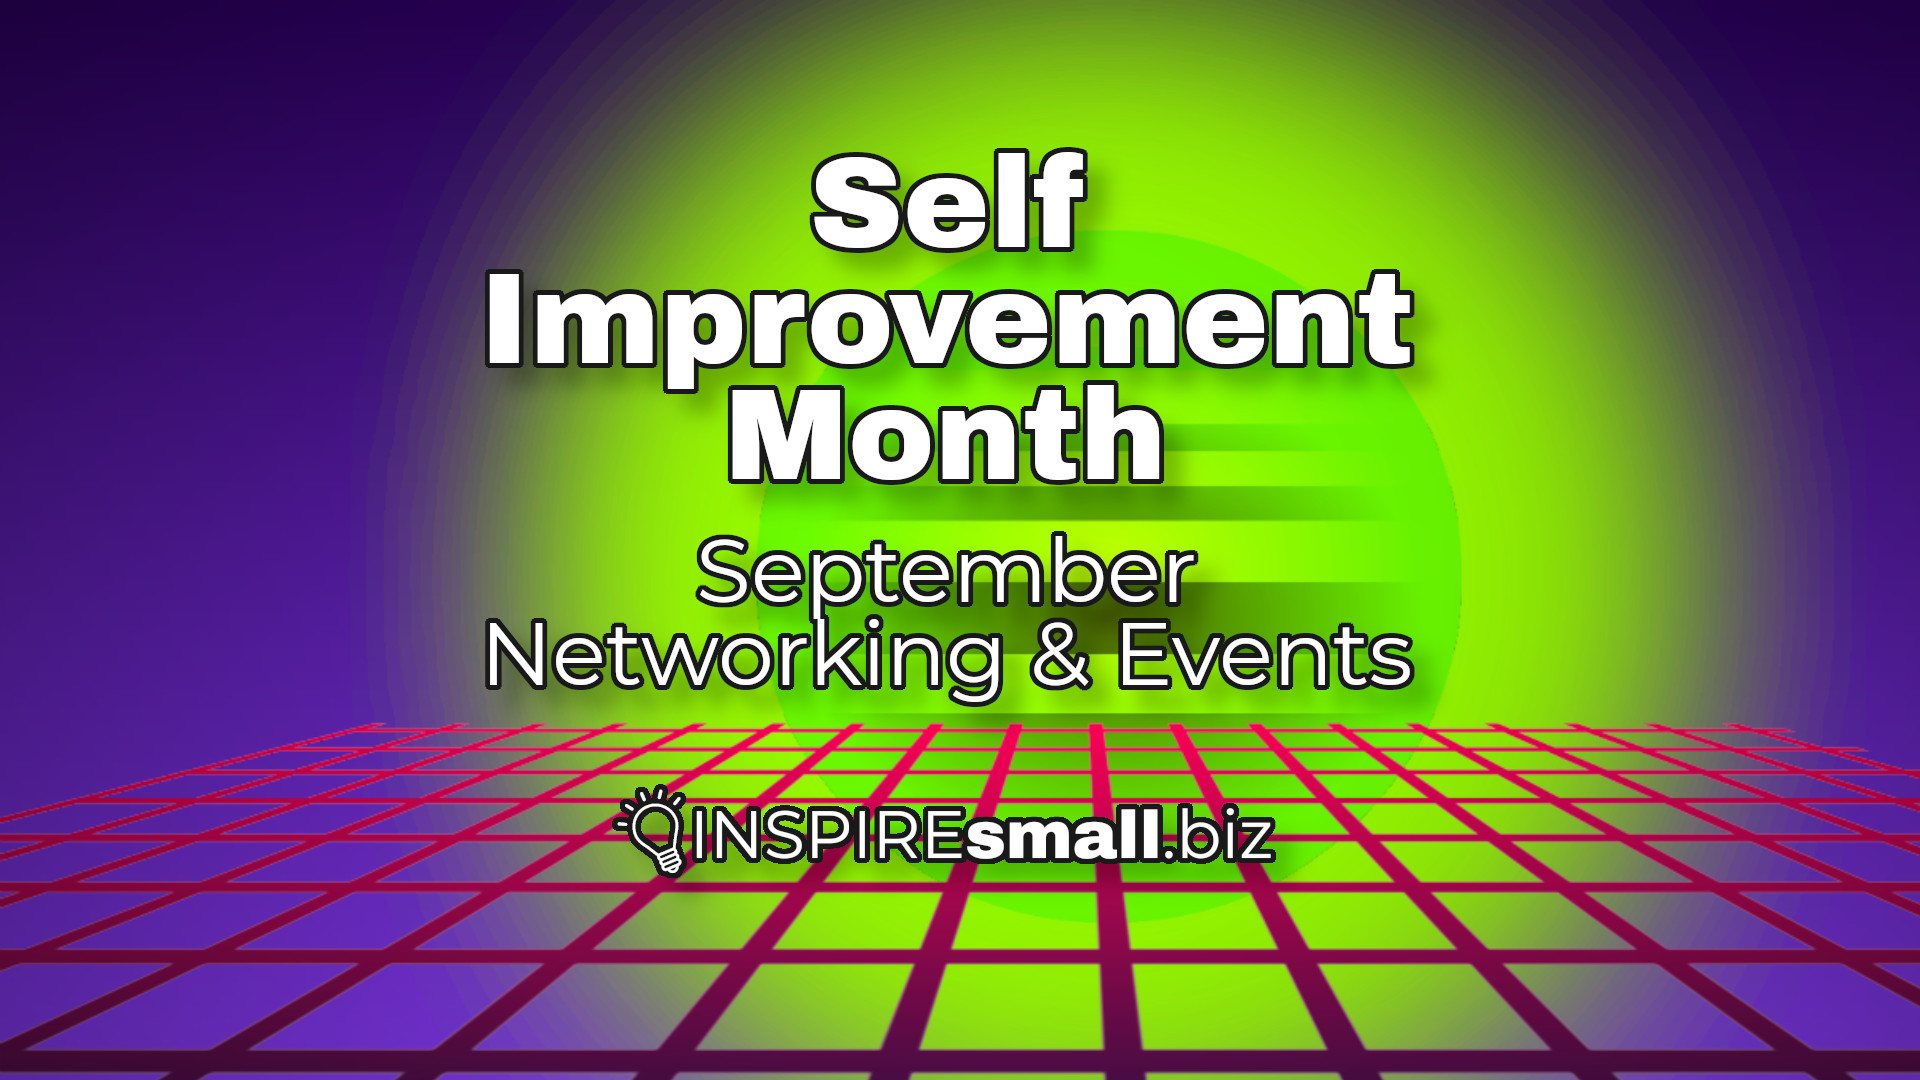 Self Improvement Month - September Networking and Events from INSPIREsmall.biz